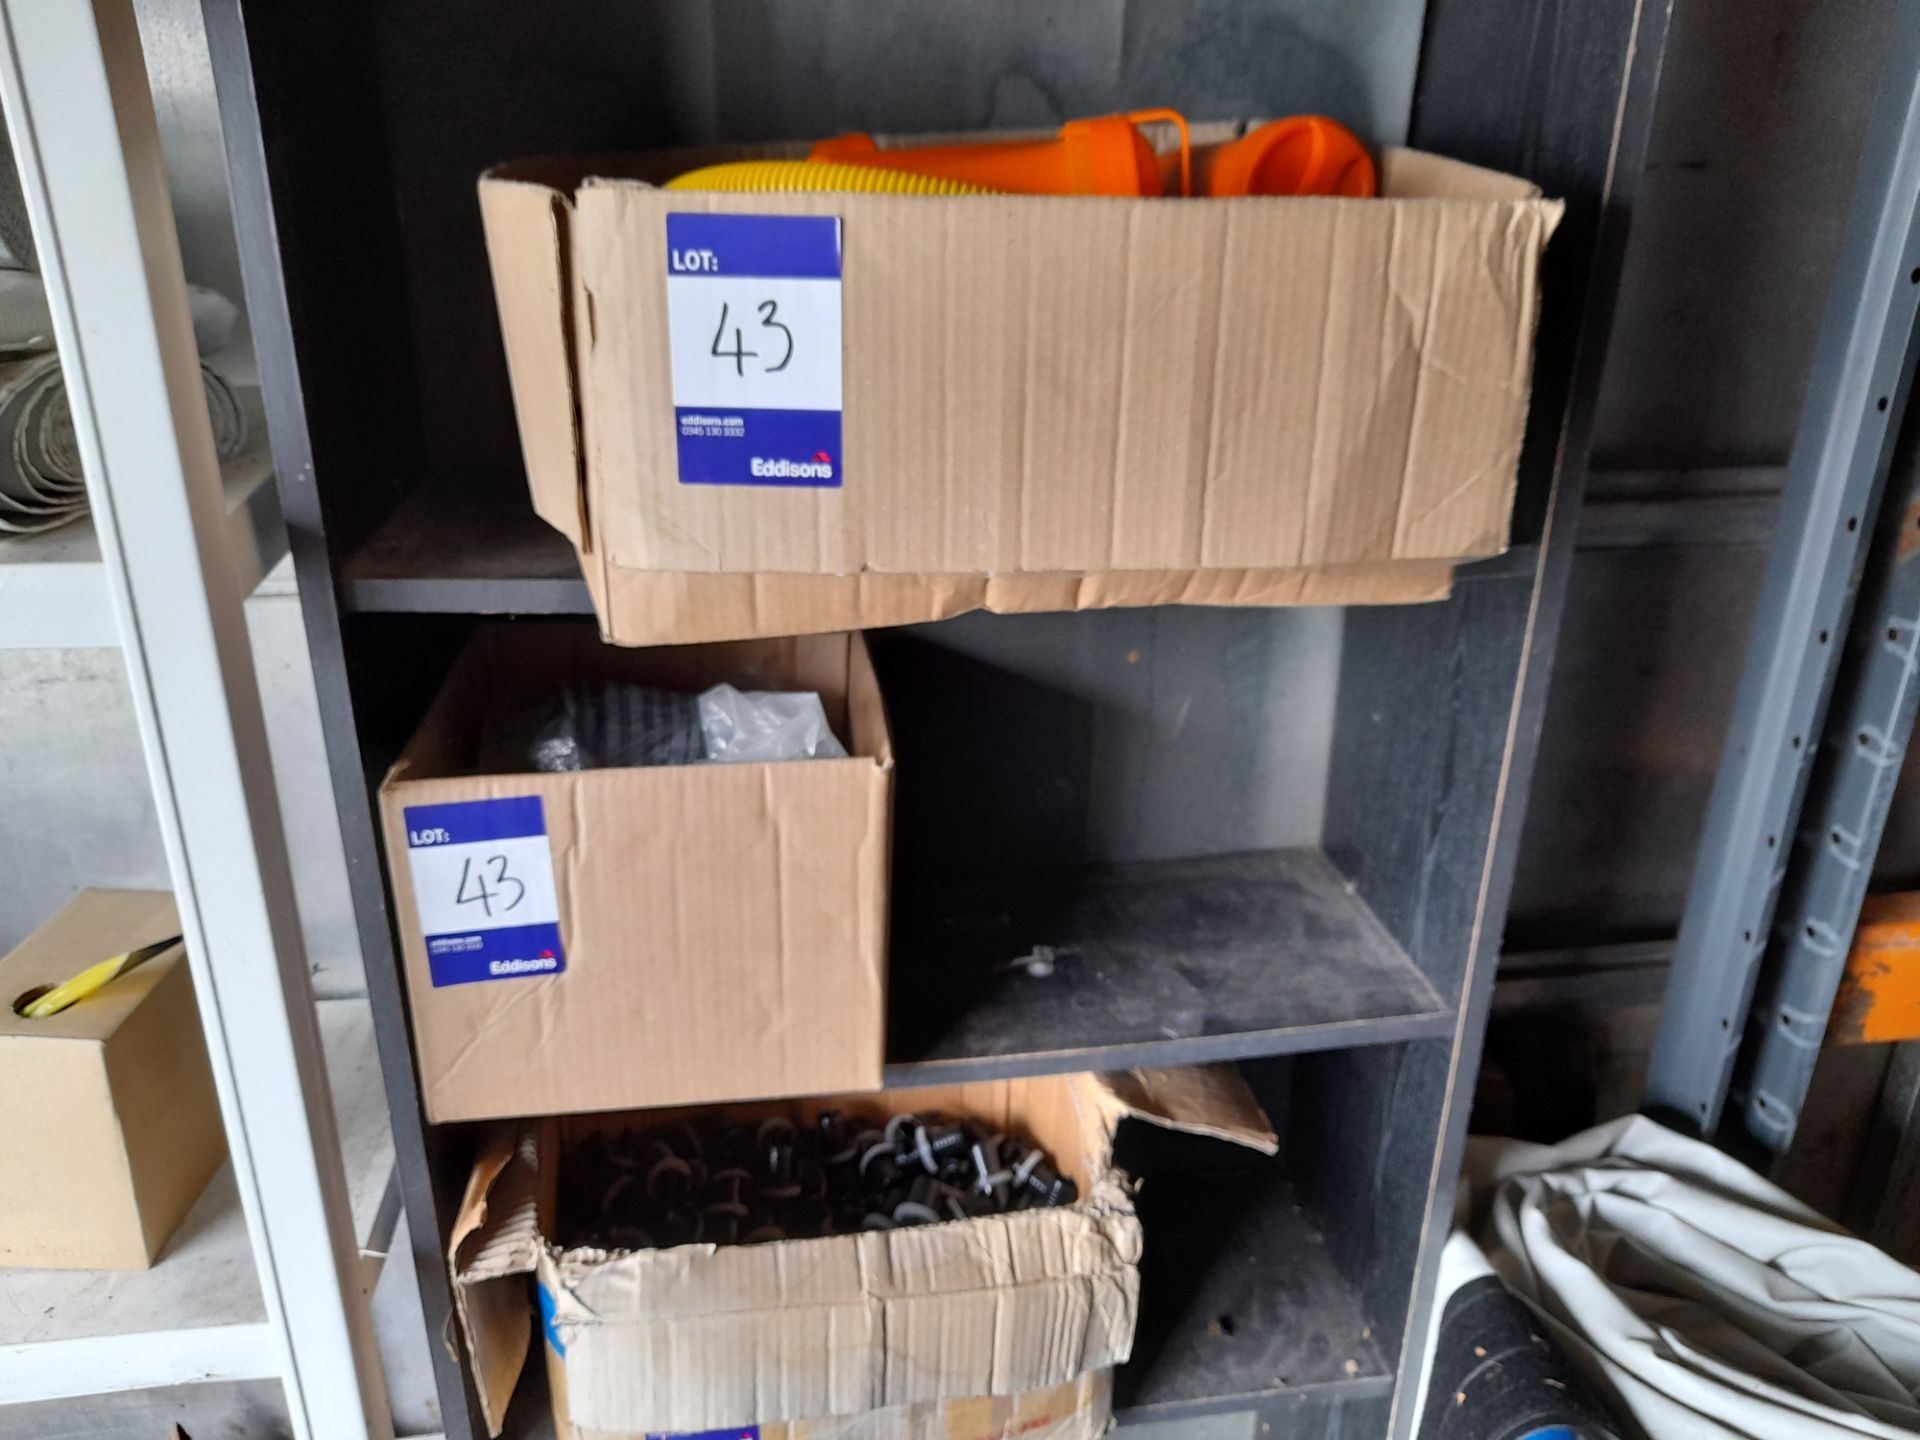 3 x Boxes of various spare components, including 1 x box of repair kits, 1 x box of air pressure